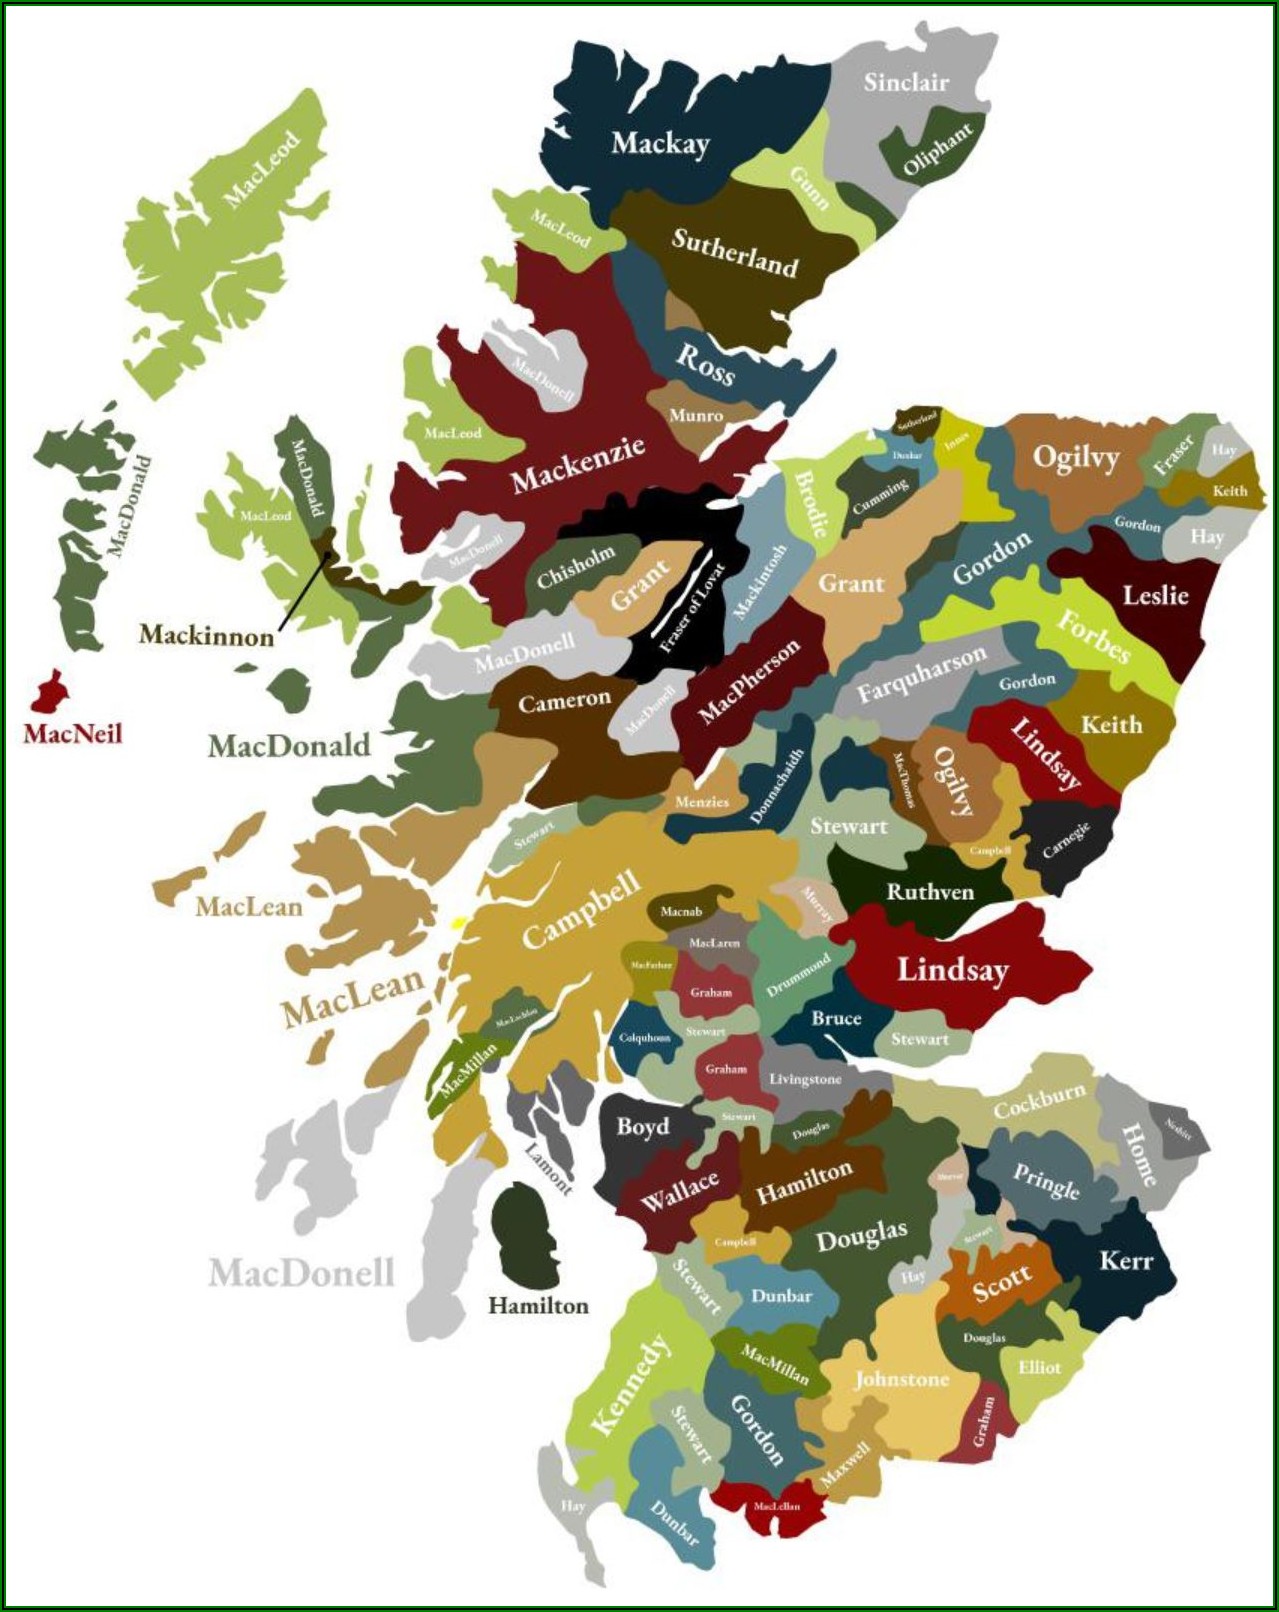 Map Of The Clans Of Scotland